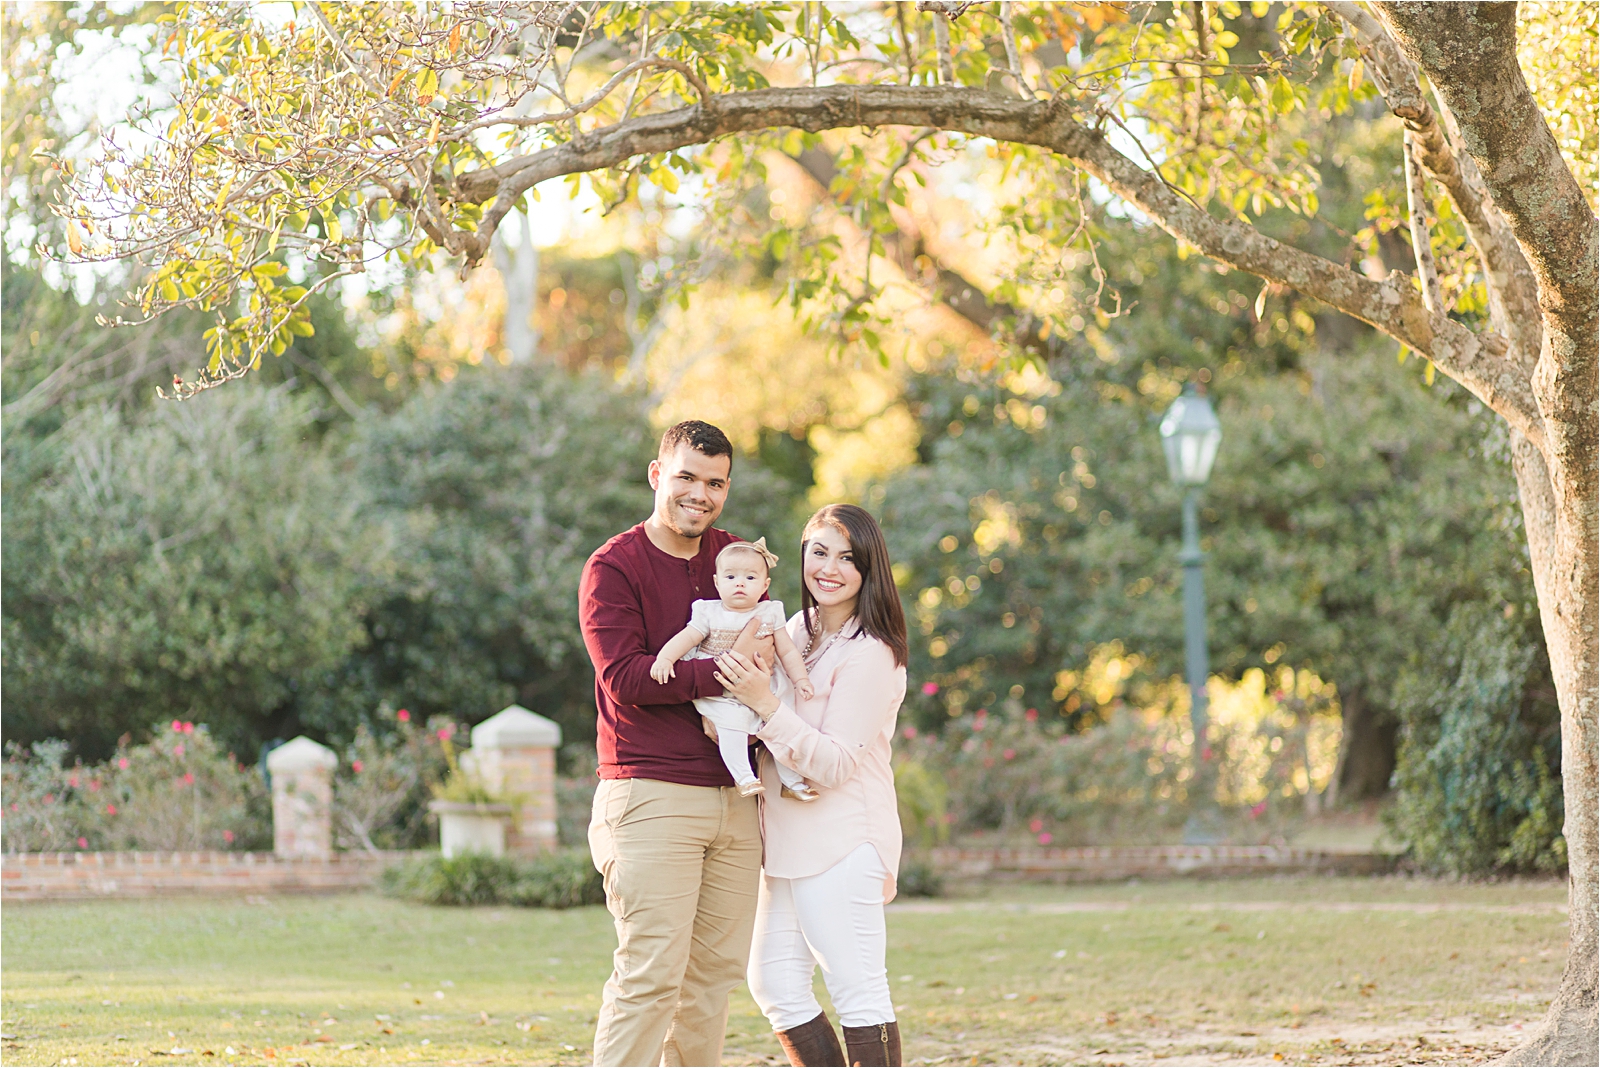 Spring Hill & Mobile Alabama Family Portraits | The Lopez Family